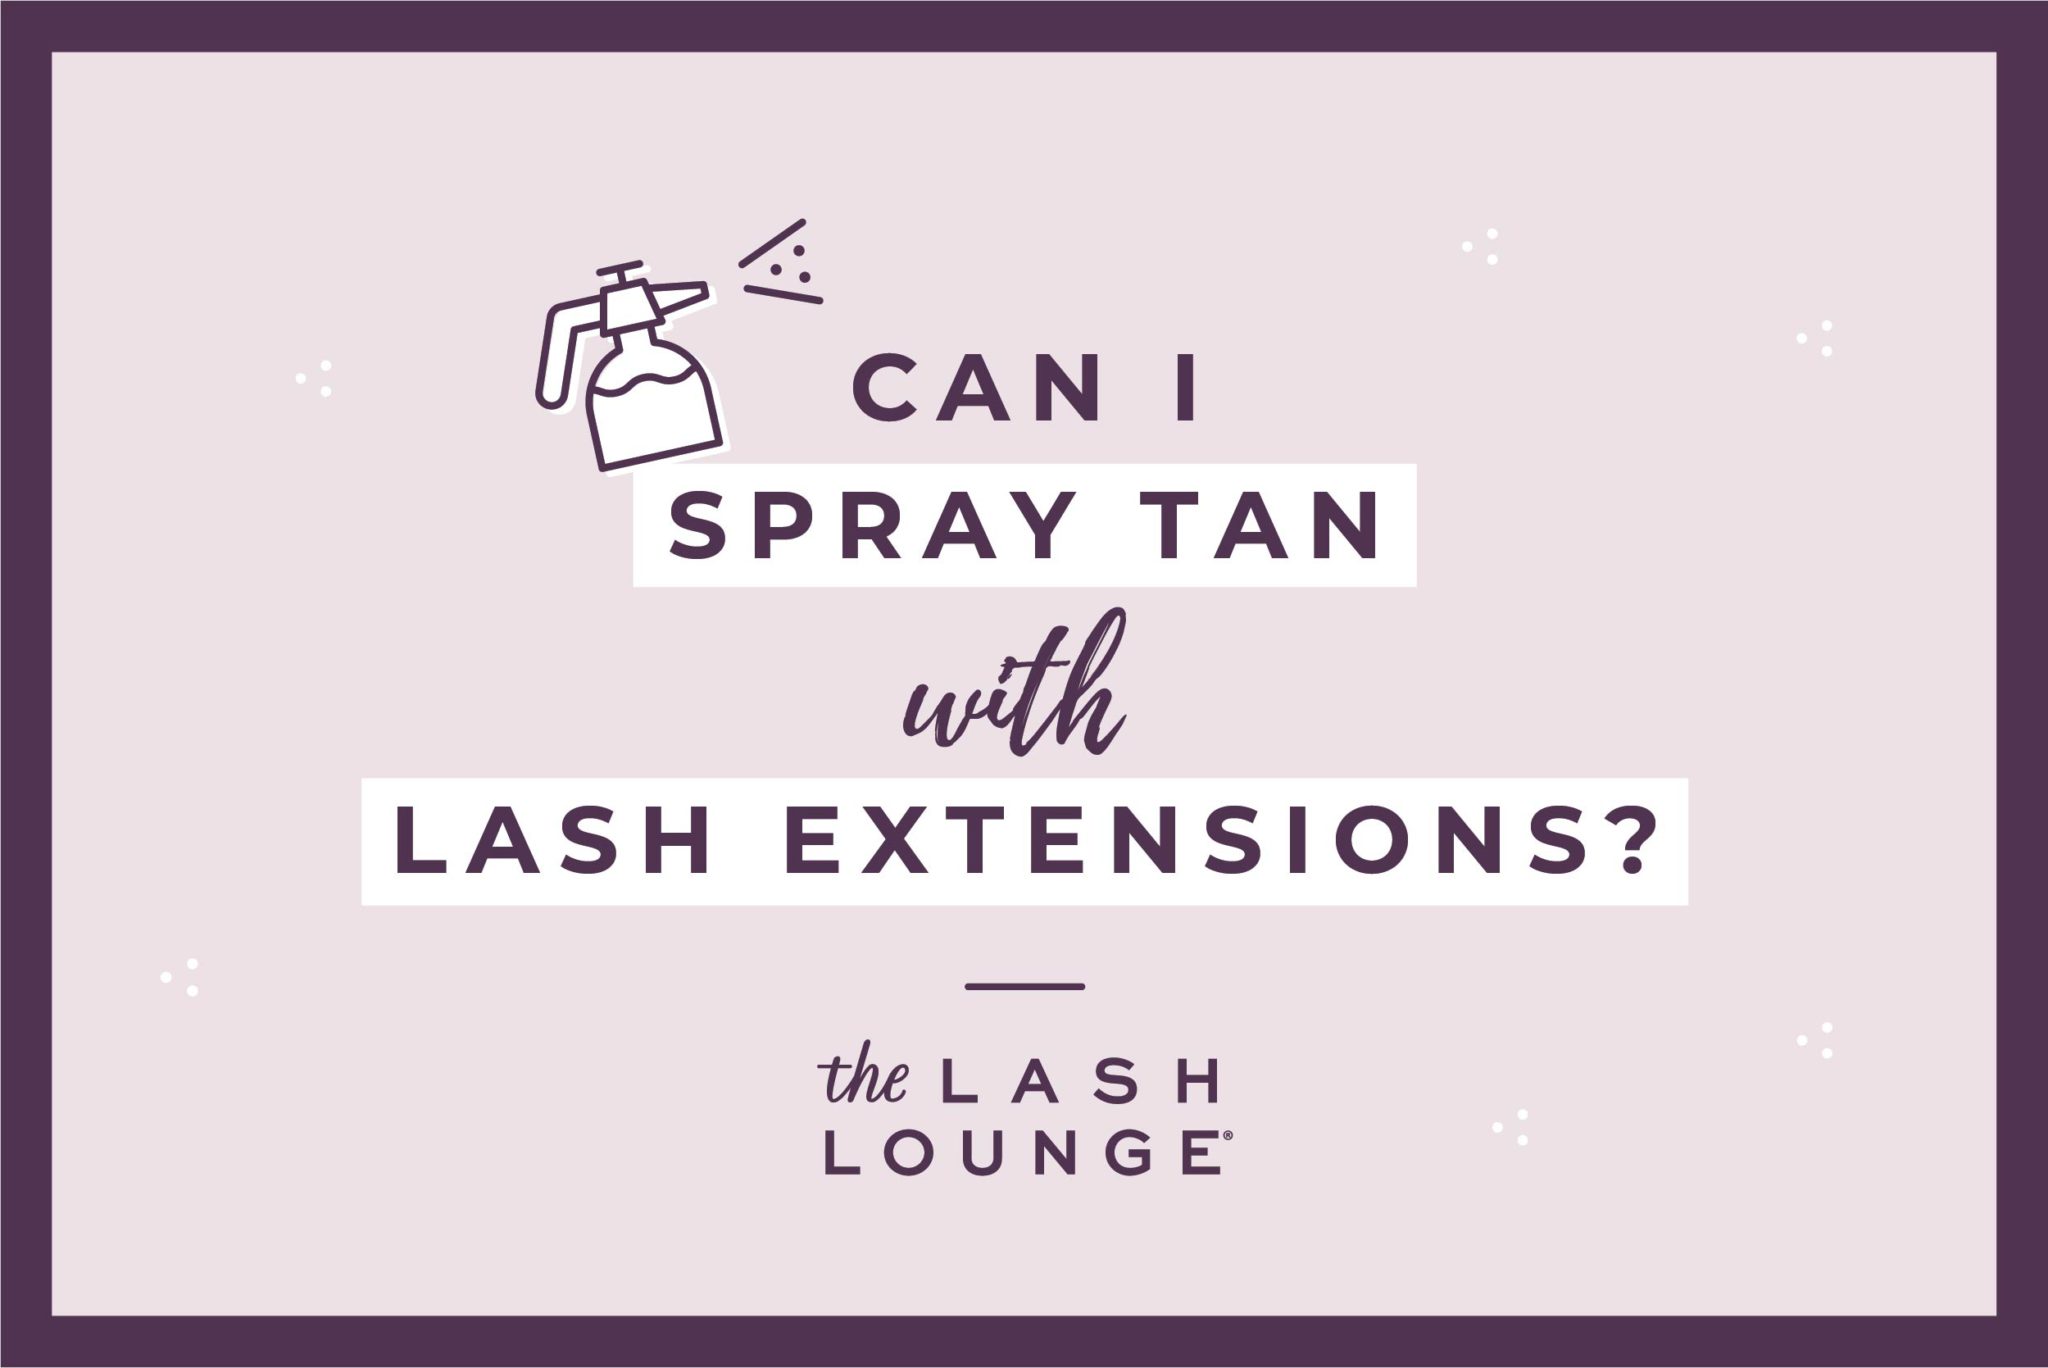 lash lounge social media graphic that says can i spray tan with lash extensions